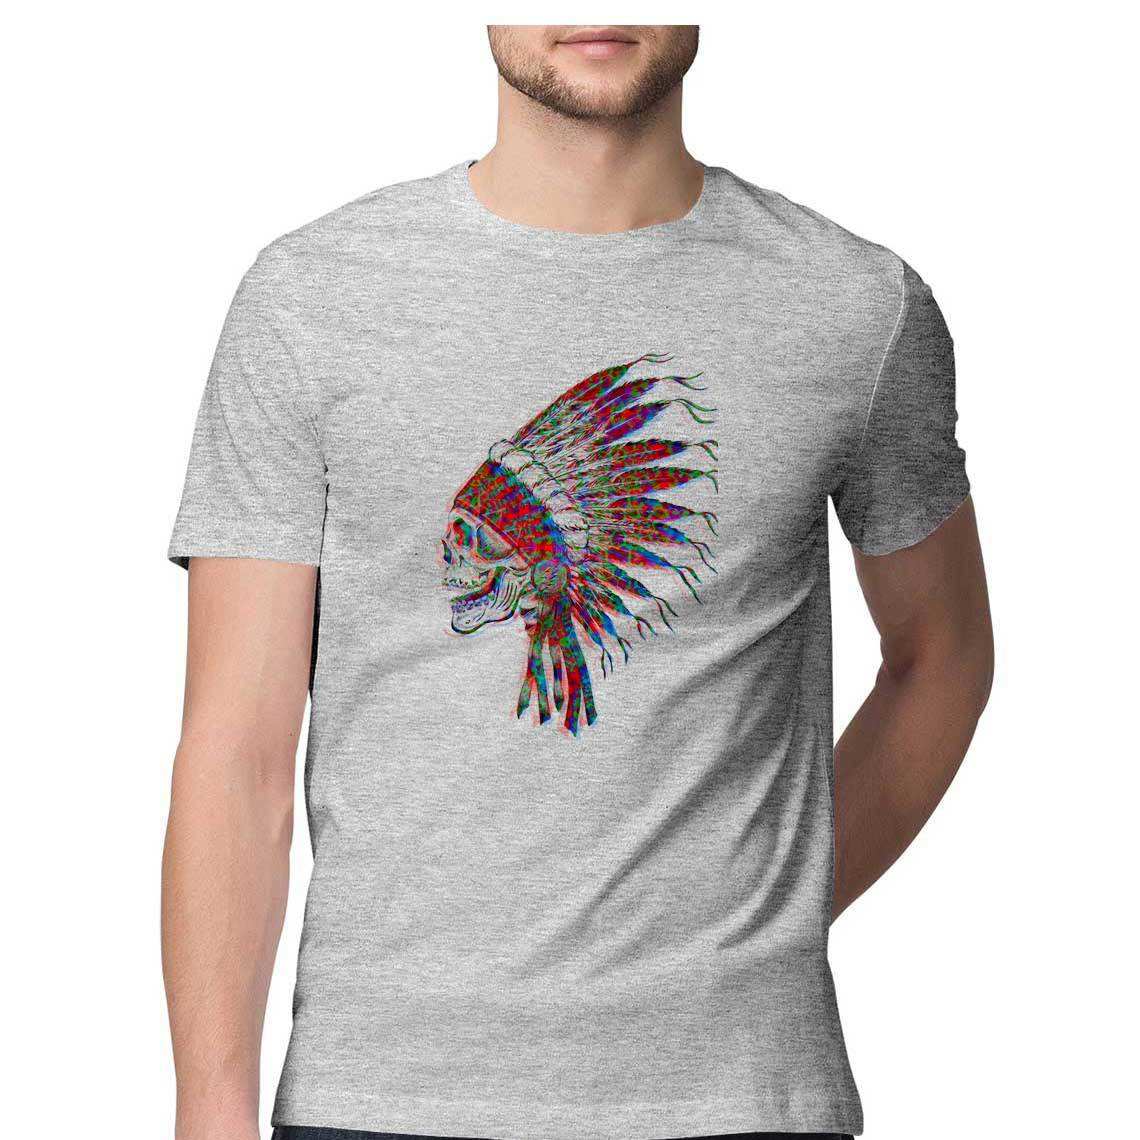 The Cherokee Chief rising from the grave Men's T-Shirt - CBD Store India